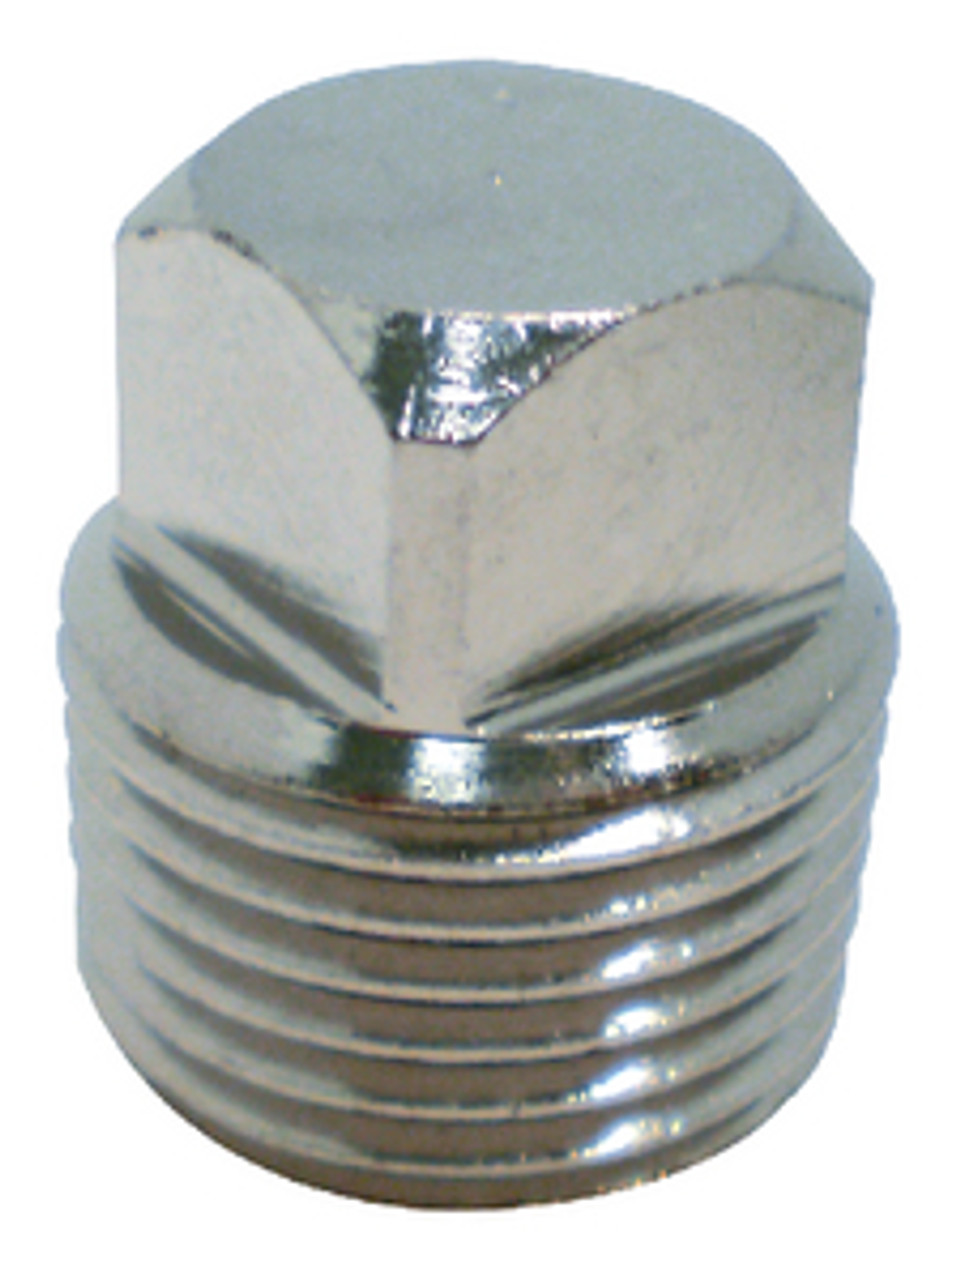 Chrome Plated Brass Garboard Drain Replacement Plug for Boats - 1/2 Inch NPT